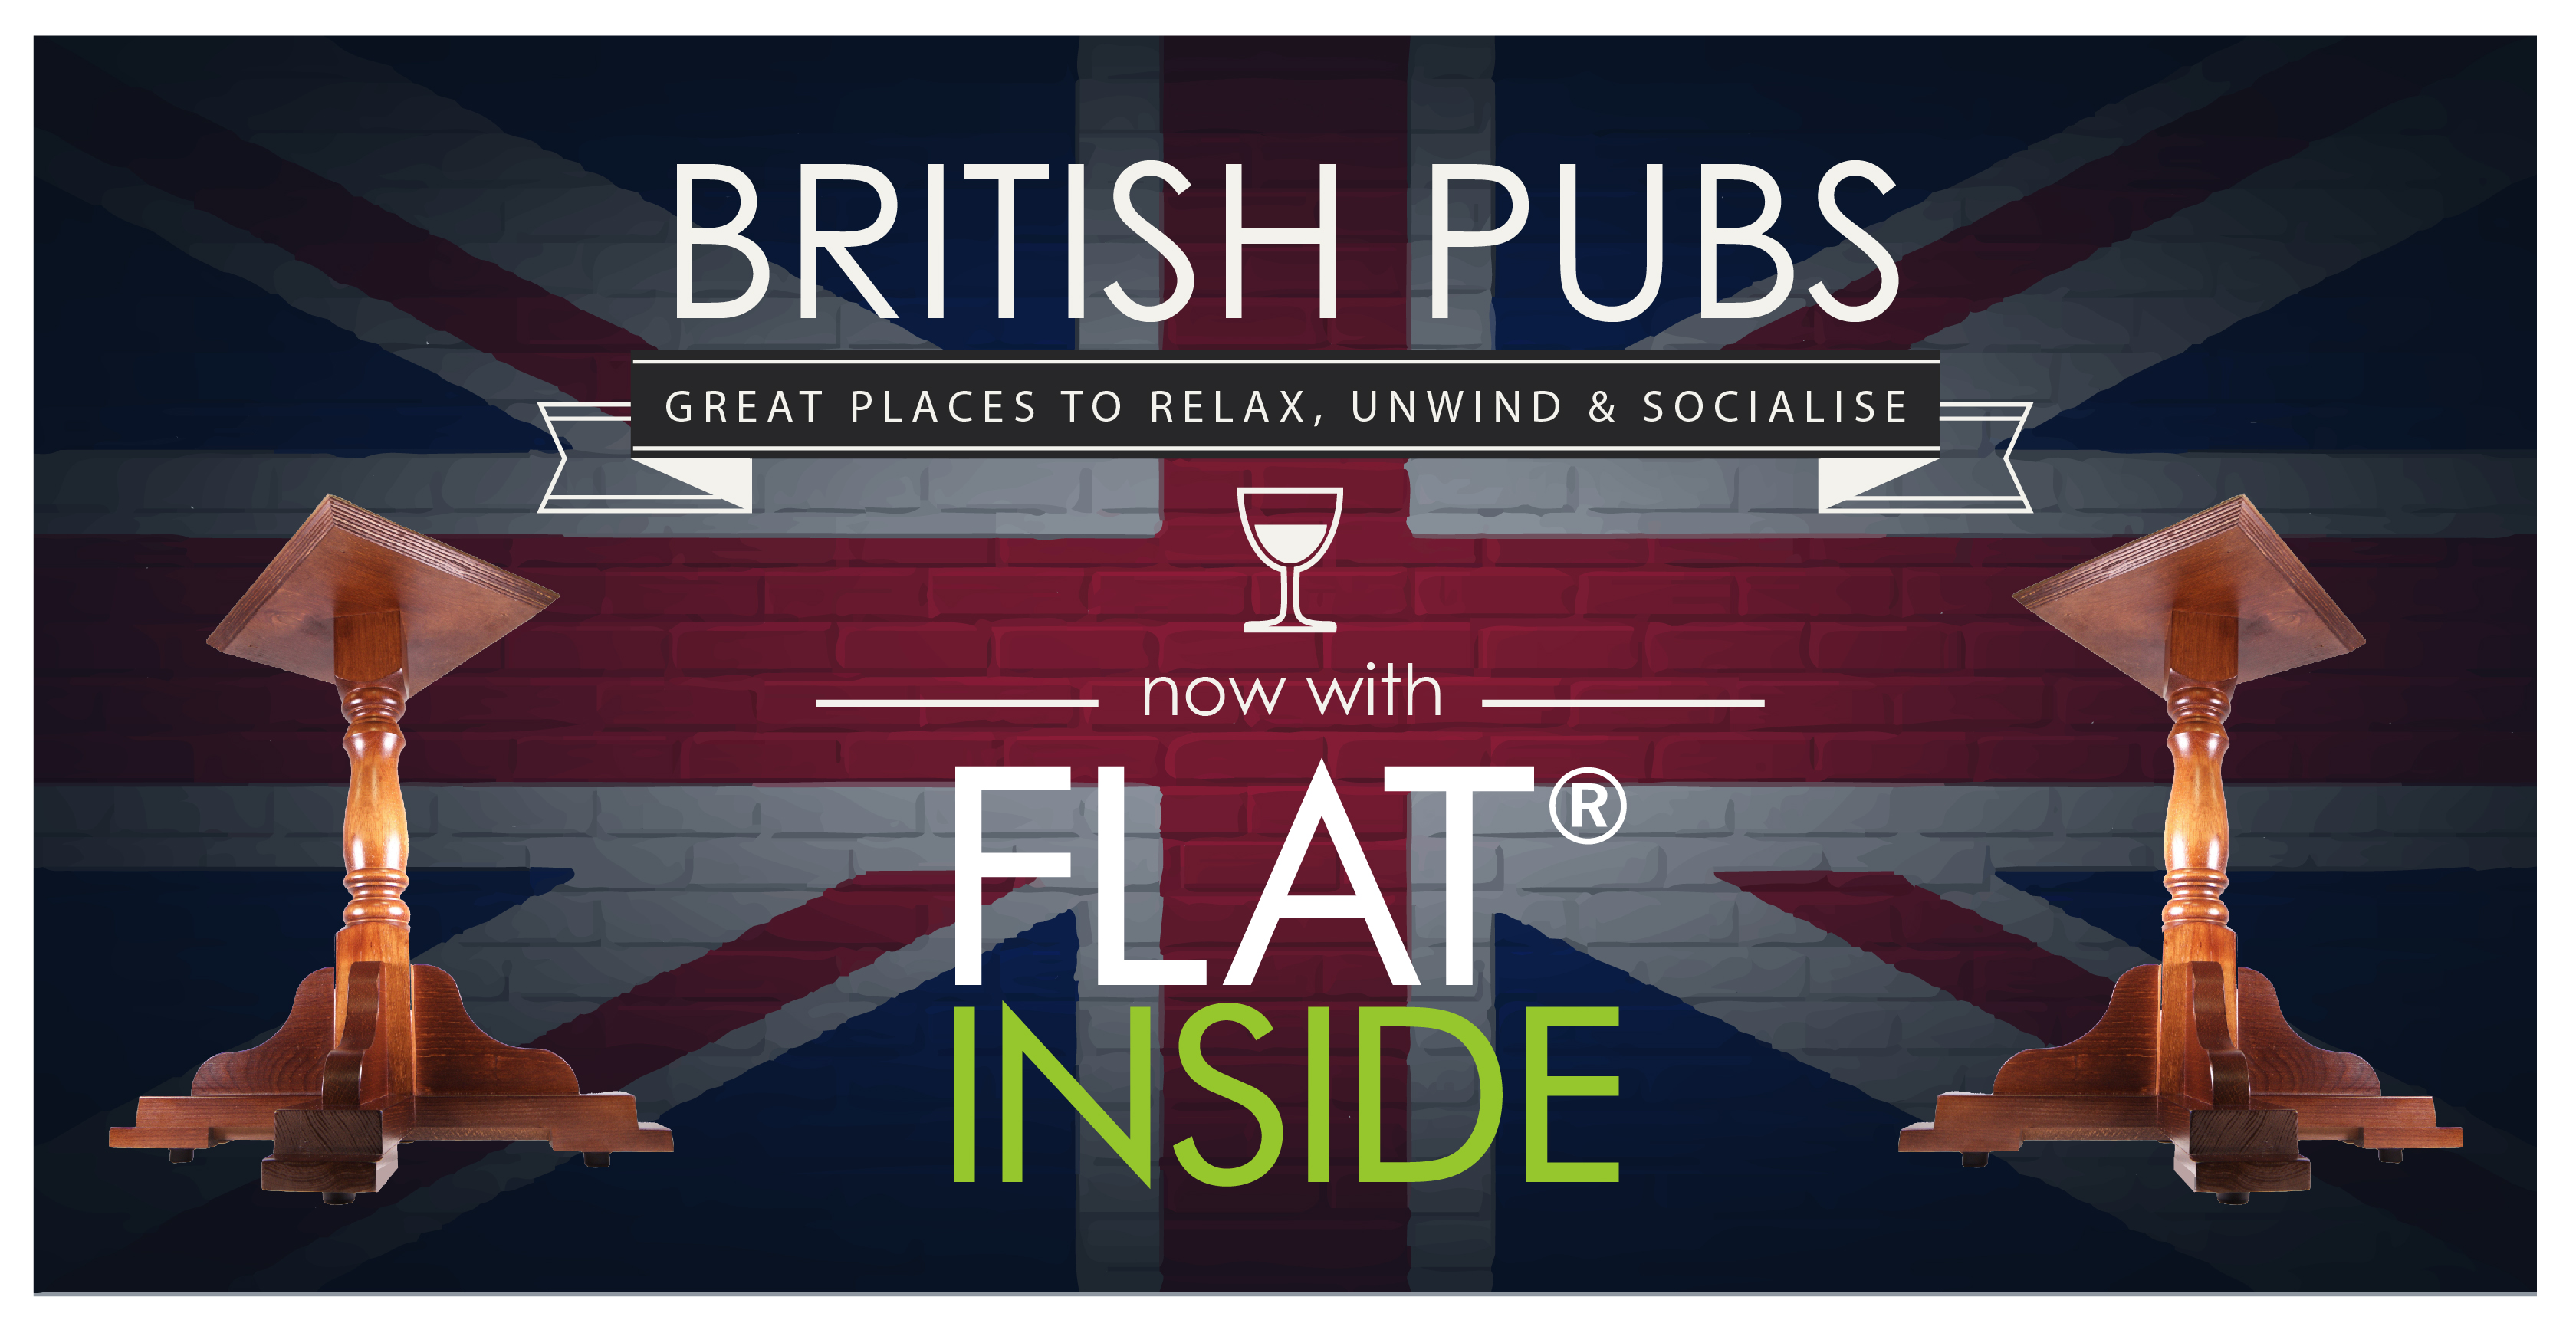 Taking the wobble out of wood – and bringing stability to British pubs